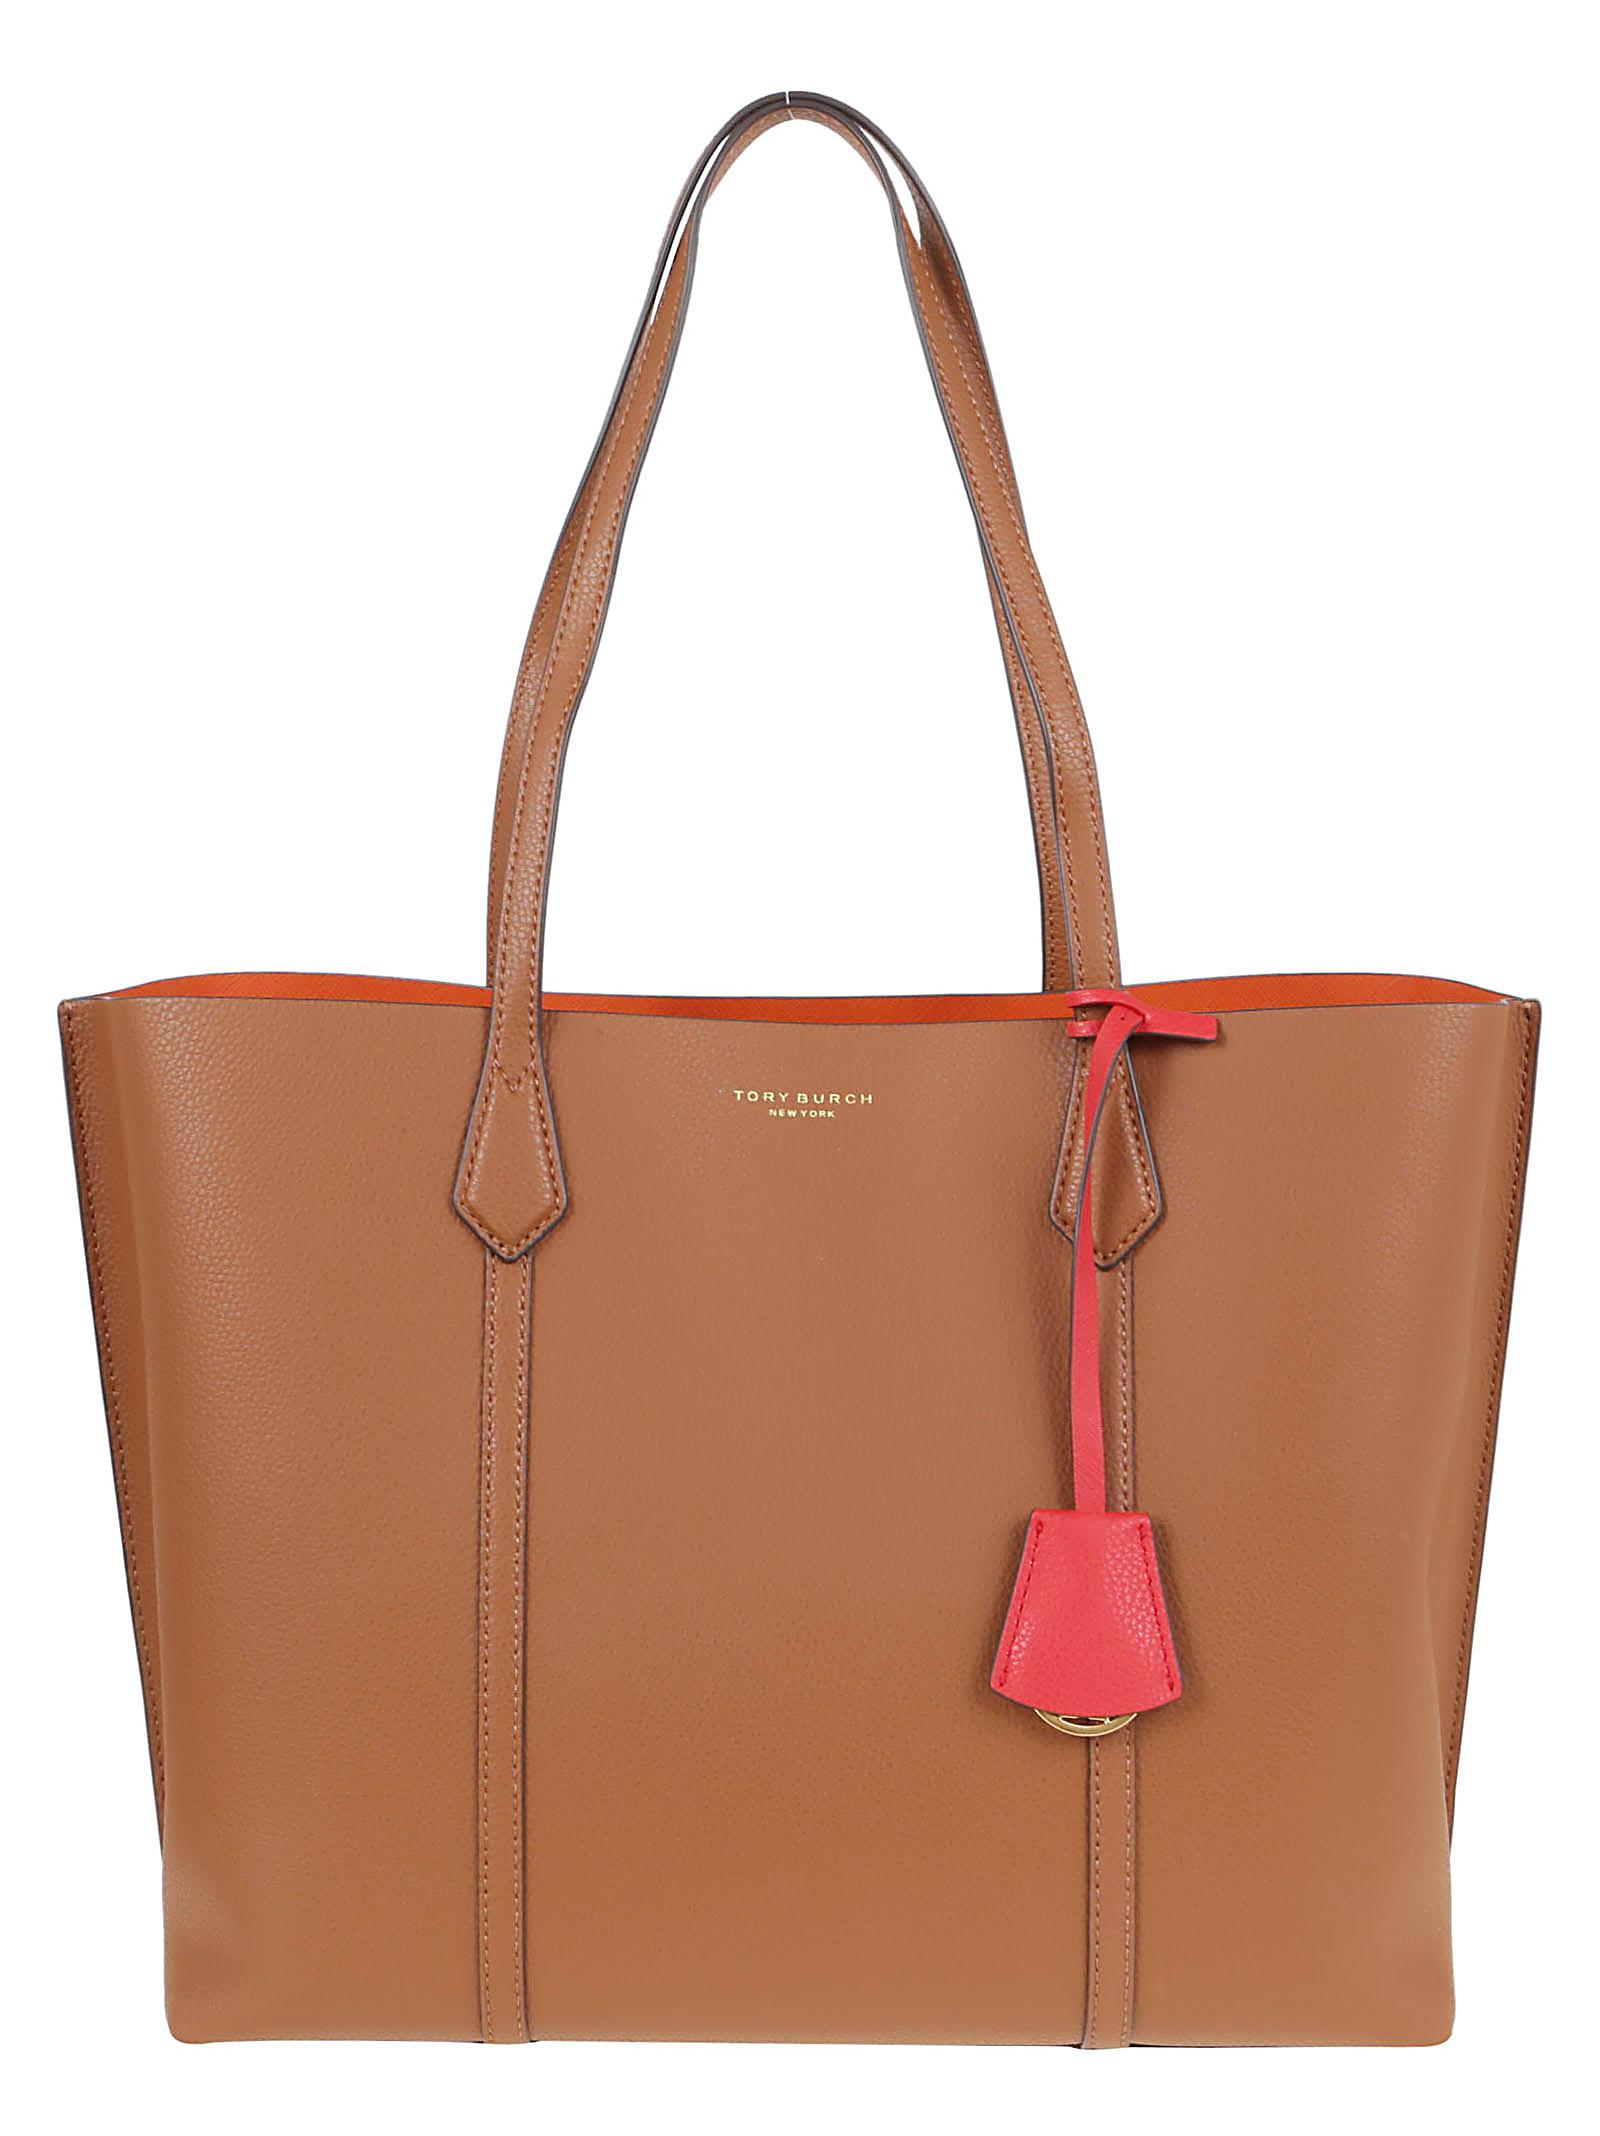 Tory Burch Leather Perry Triple Compartment Tote in Brown - Lyst